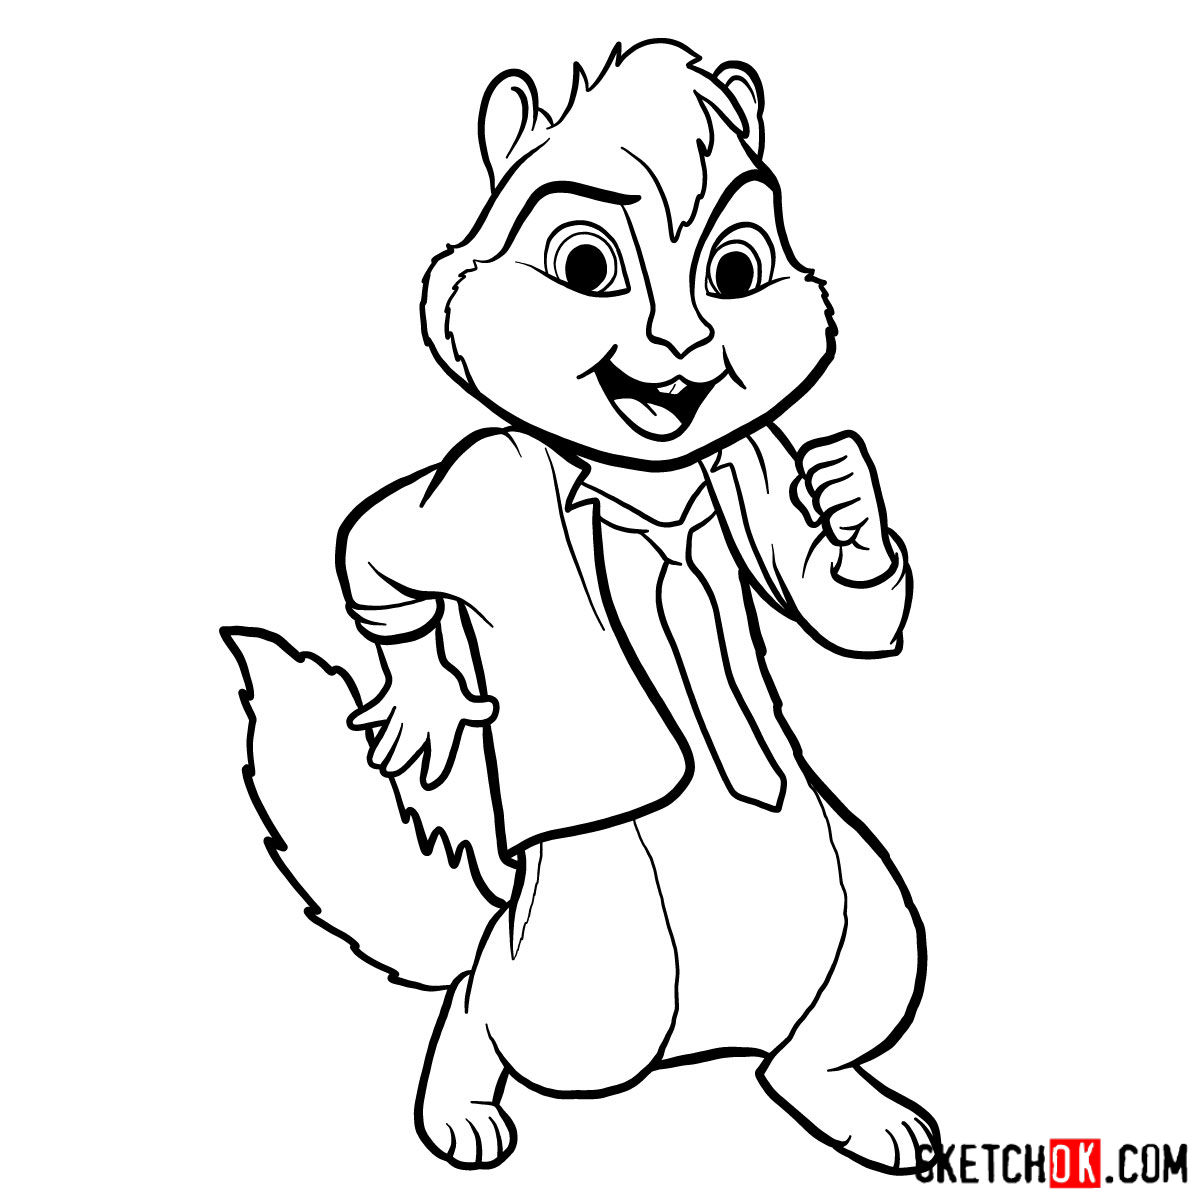 How to draw Alvin from Alvin and the Chipmunks - step 15